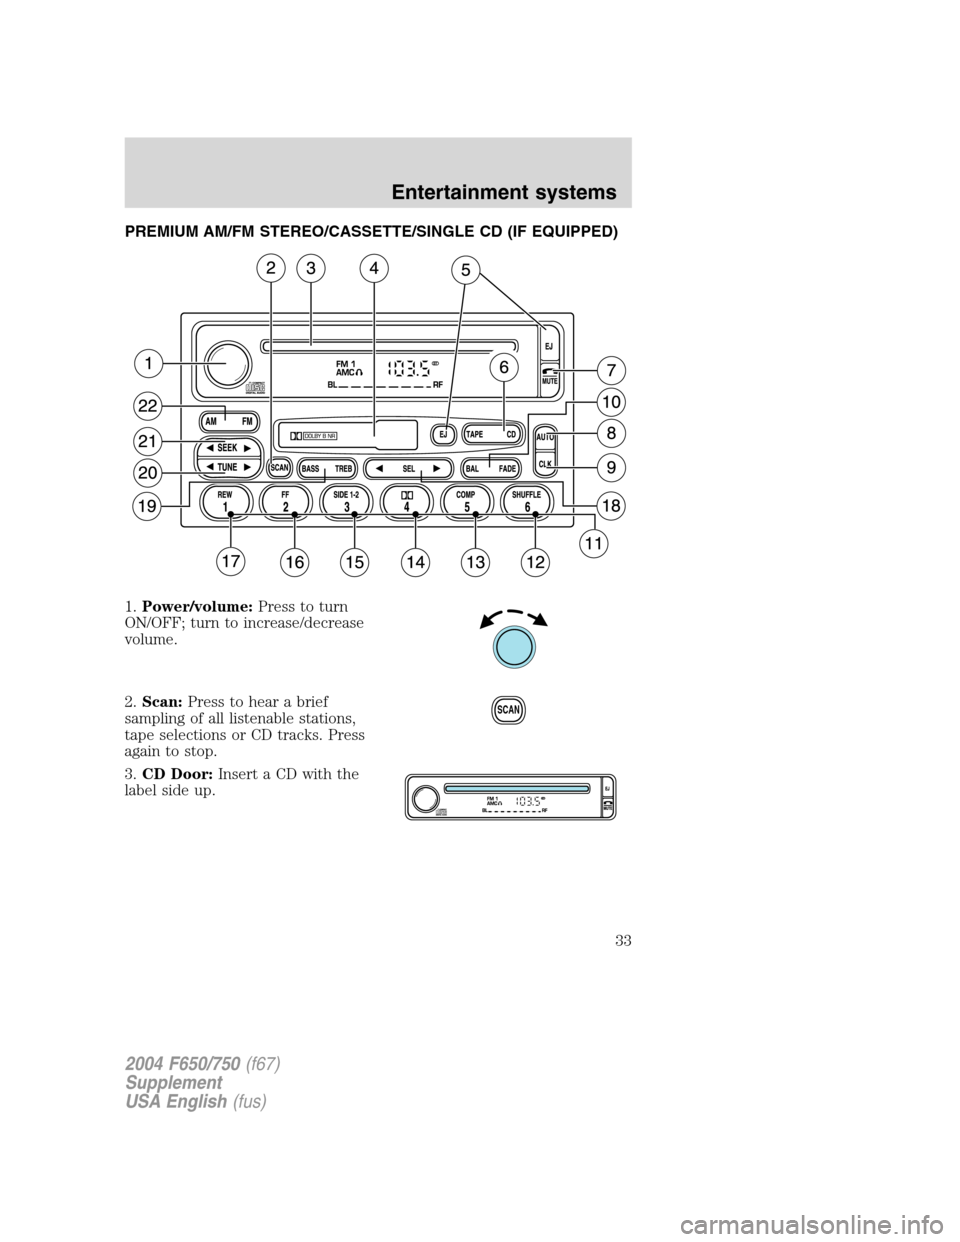 FORD F650 2004 11.G Owners Guide PREMIUM AM/FM STEREO/CASSETTE/SINGLE CD (IF EQUIPPED)
1.Power/volume:Press to turn
ON/OFF; turn to increase/decrease
volume.
2.Scan:Press to hear a brief
sampling of all listenable stations,
tape sele